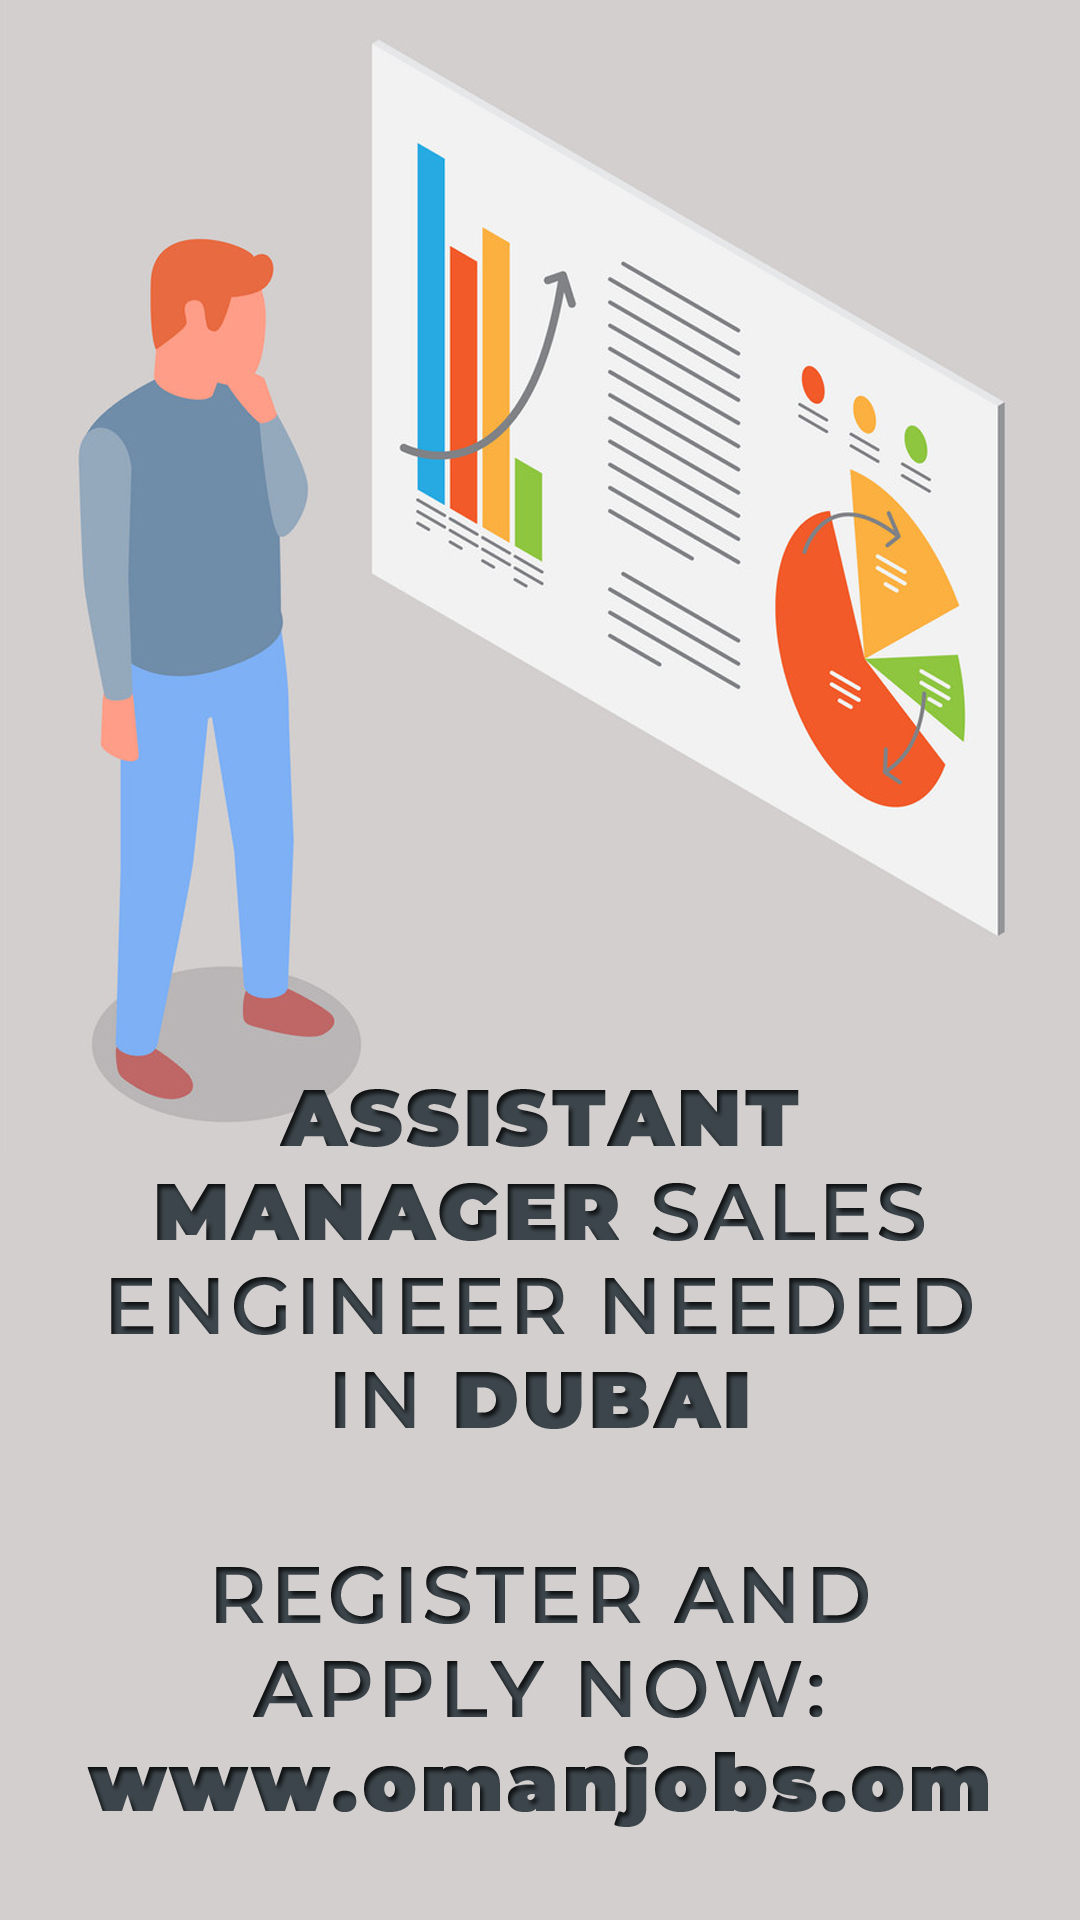 Hiring ASSISTANT MANAGER SALES ENGINEER